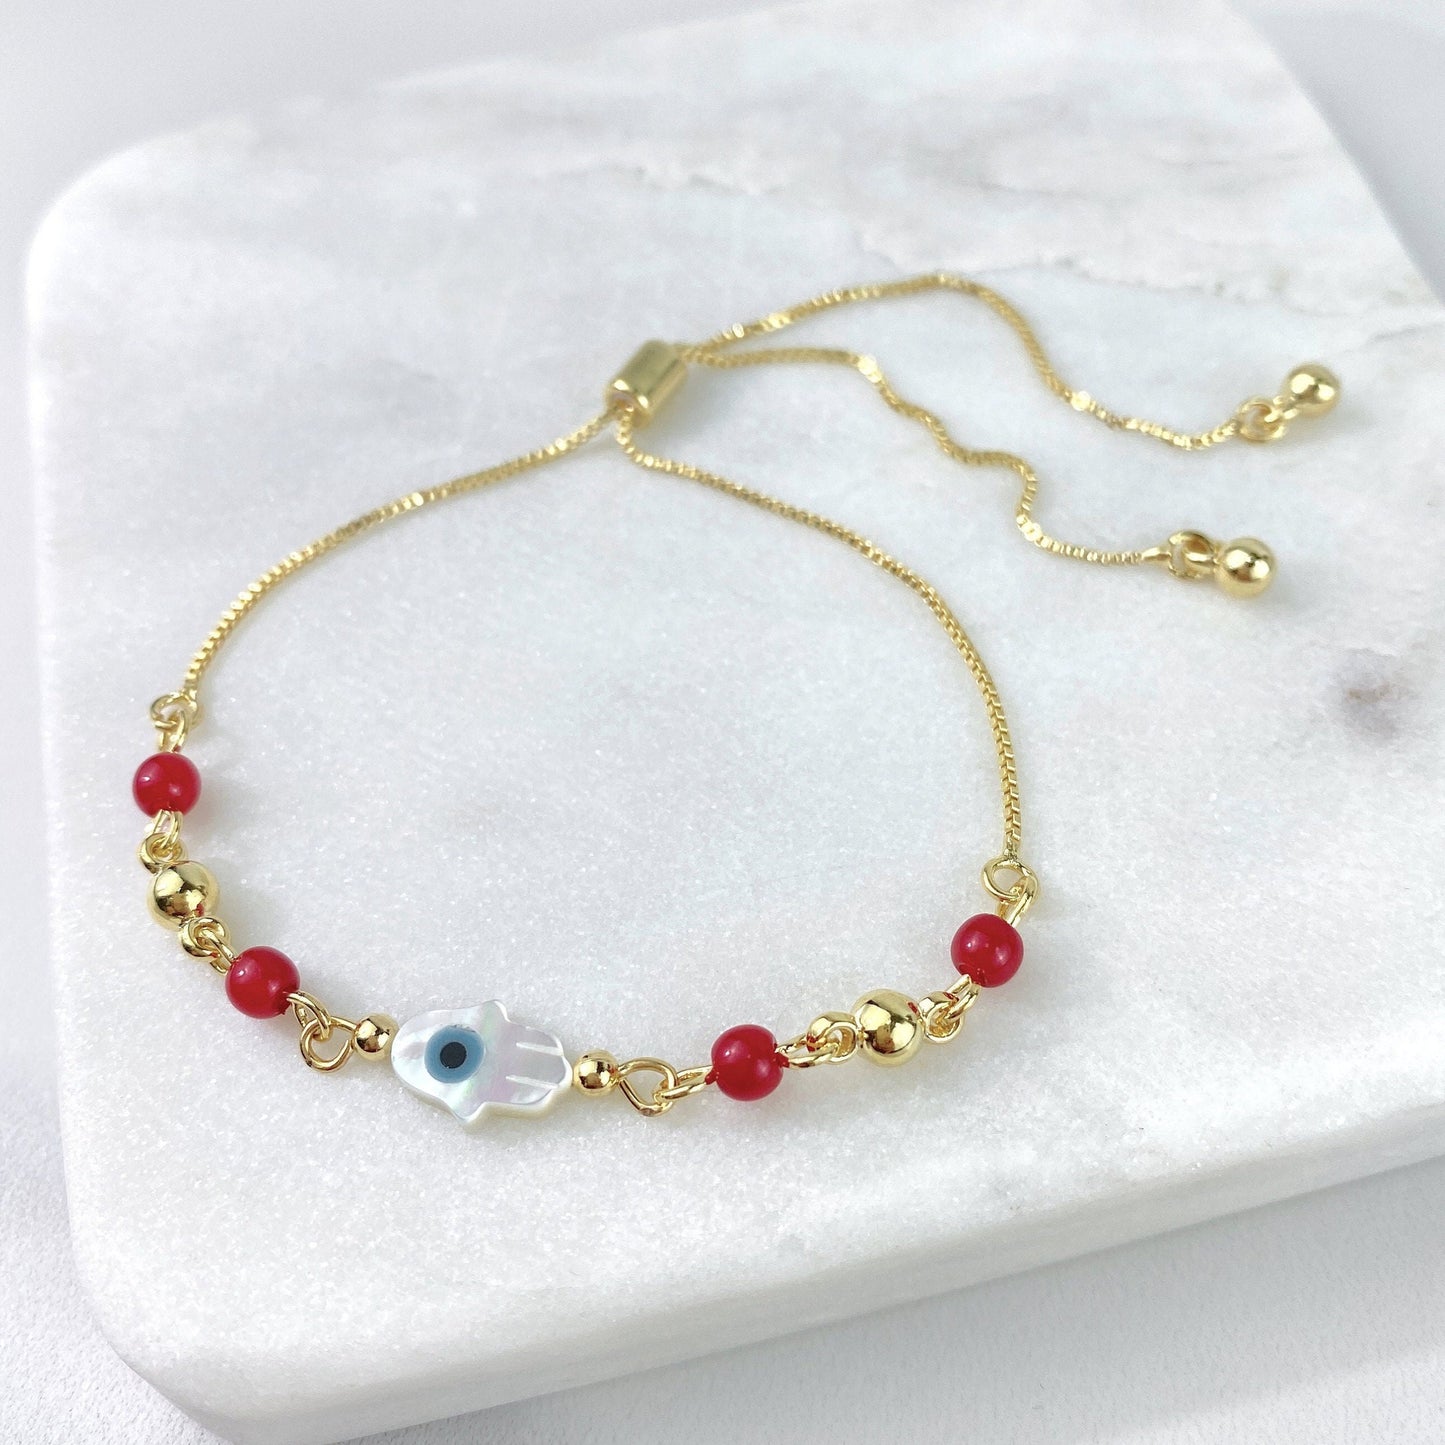 18k Gold Filled 1mm Box Chain, Red & Gold Beads, Blue Evil Eye Hamsa Hand, Adjustable Bracelet, Wholesale Jewelry Making Supplies